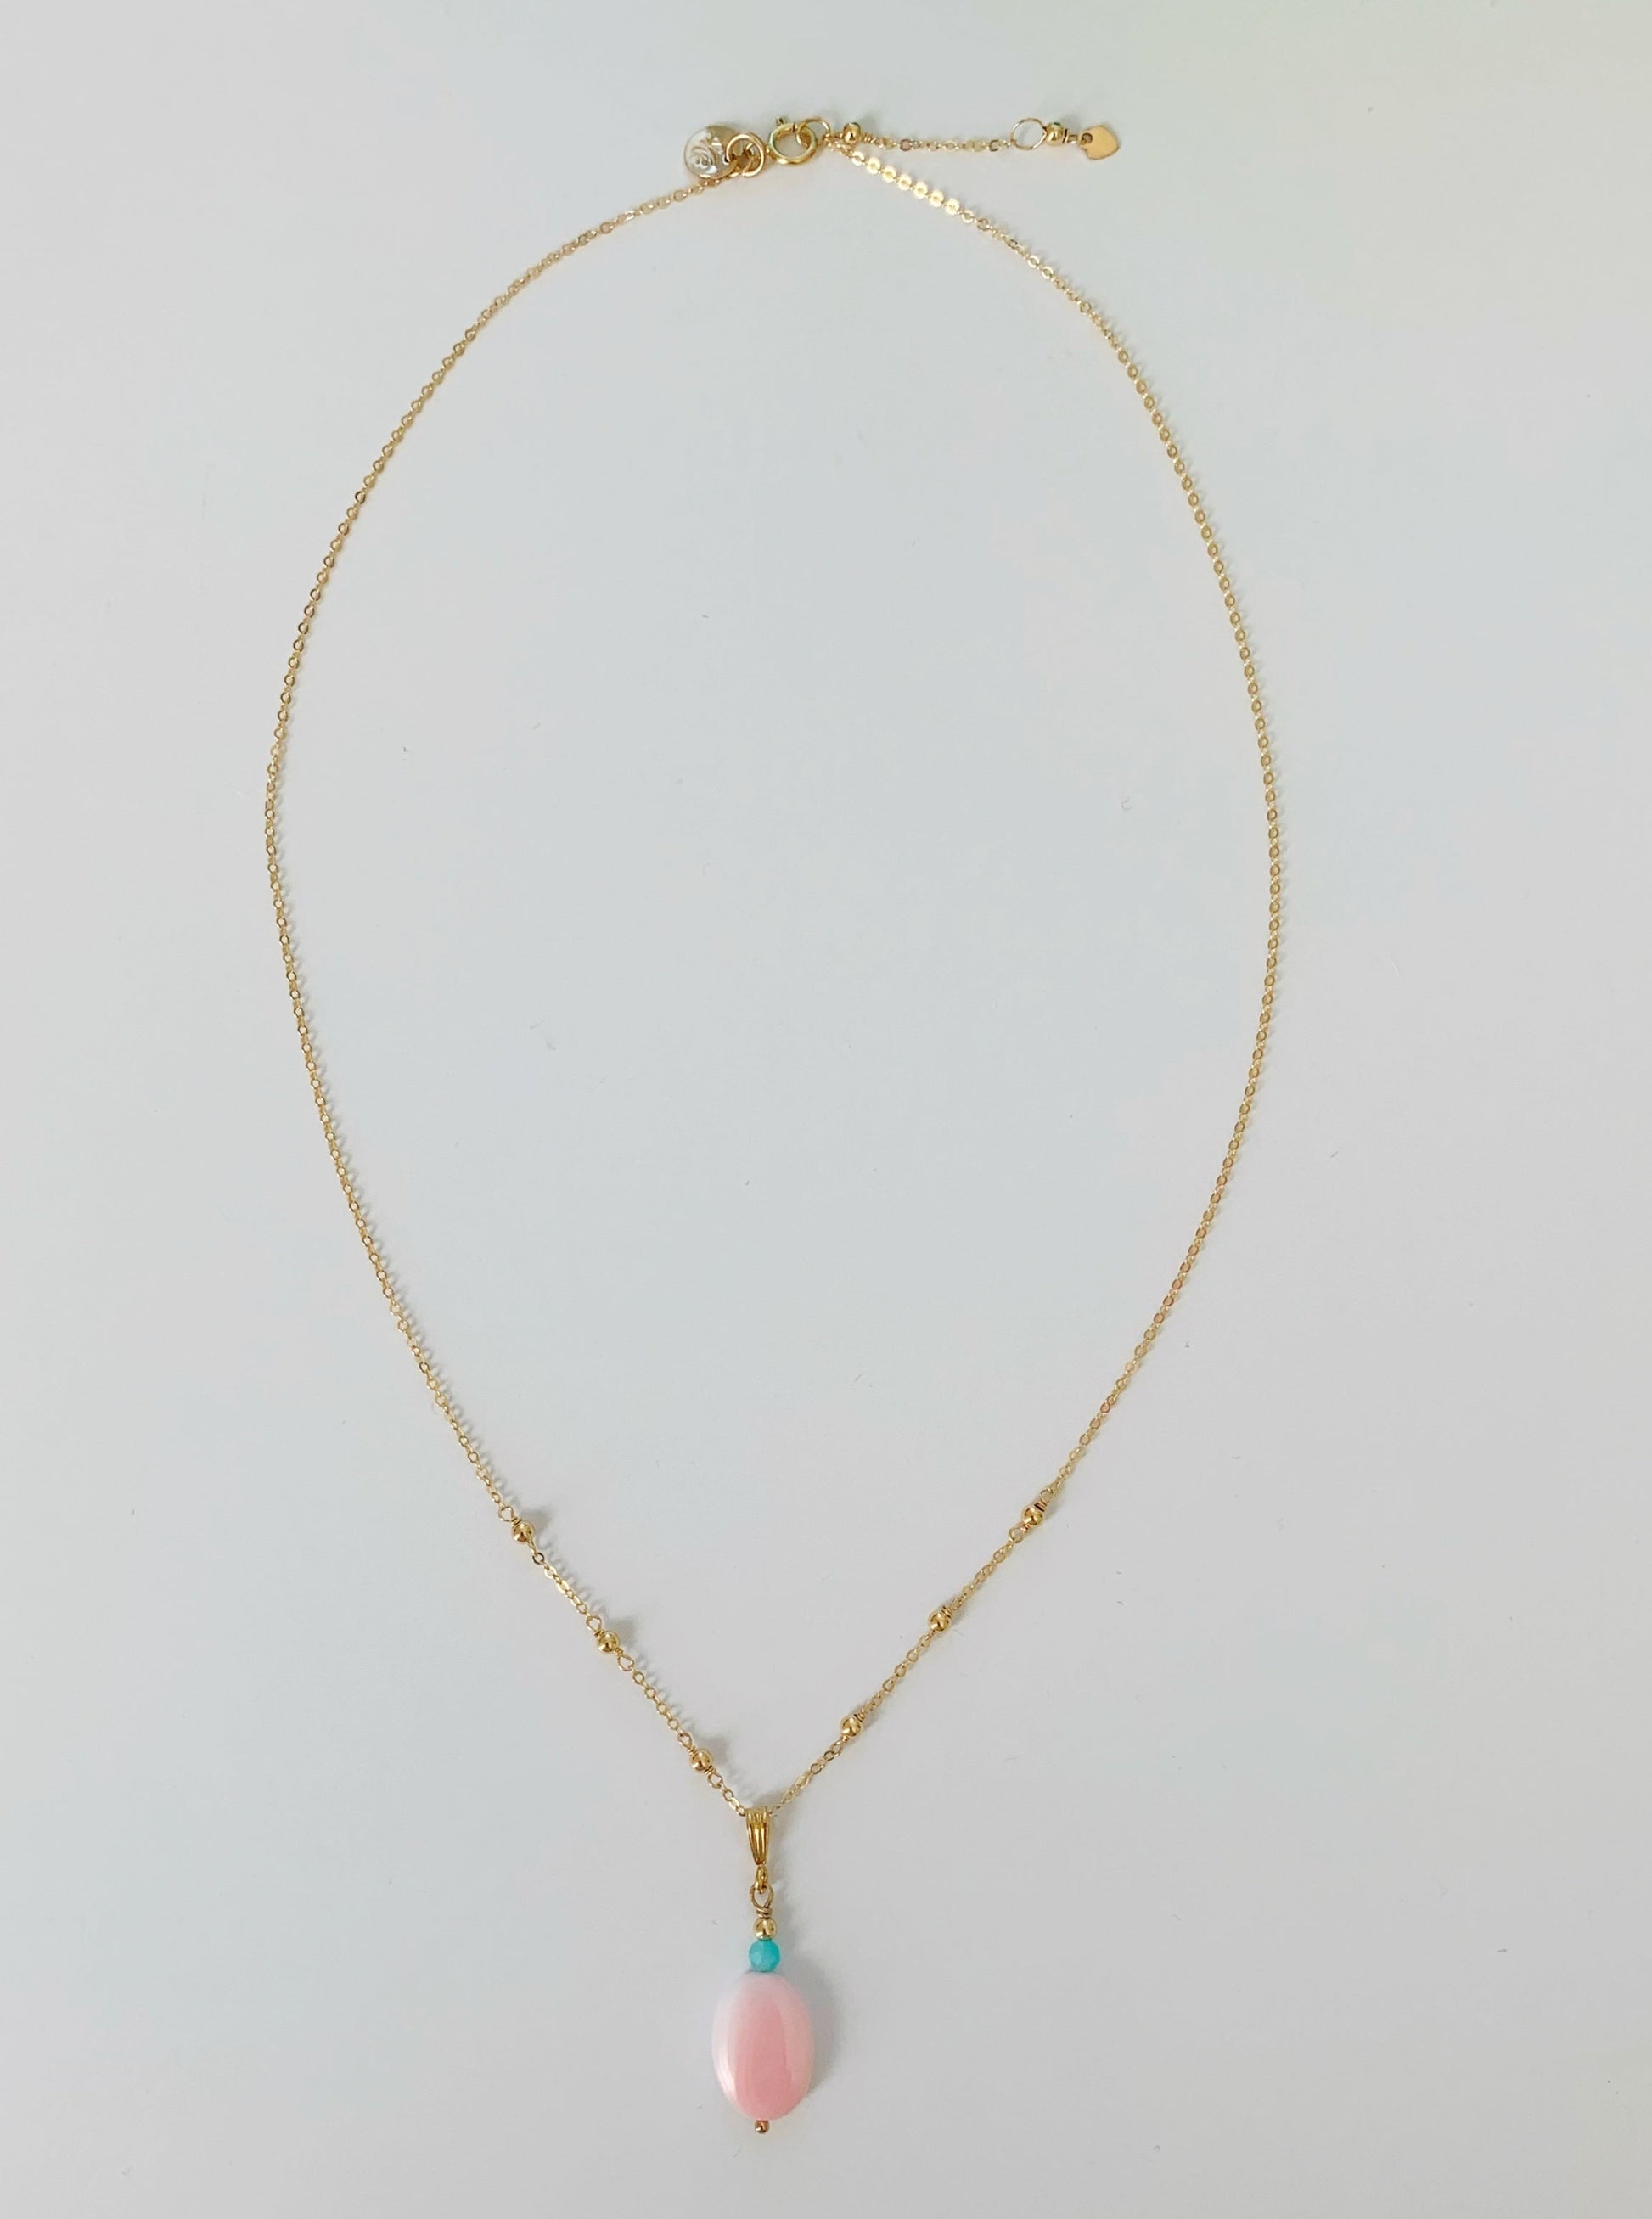 Full length view of the sanibel necklace. necklace has a pink conch shell bead as a pendant with an amazonite bead and its on 14k gold filled chain. this necklace is pictured on a white surface